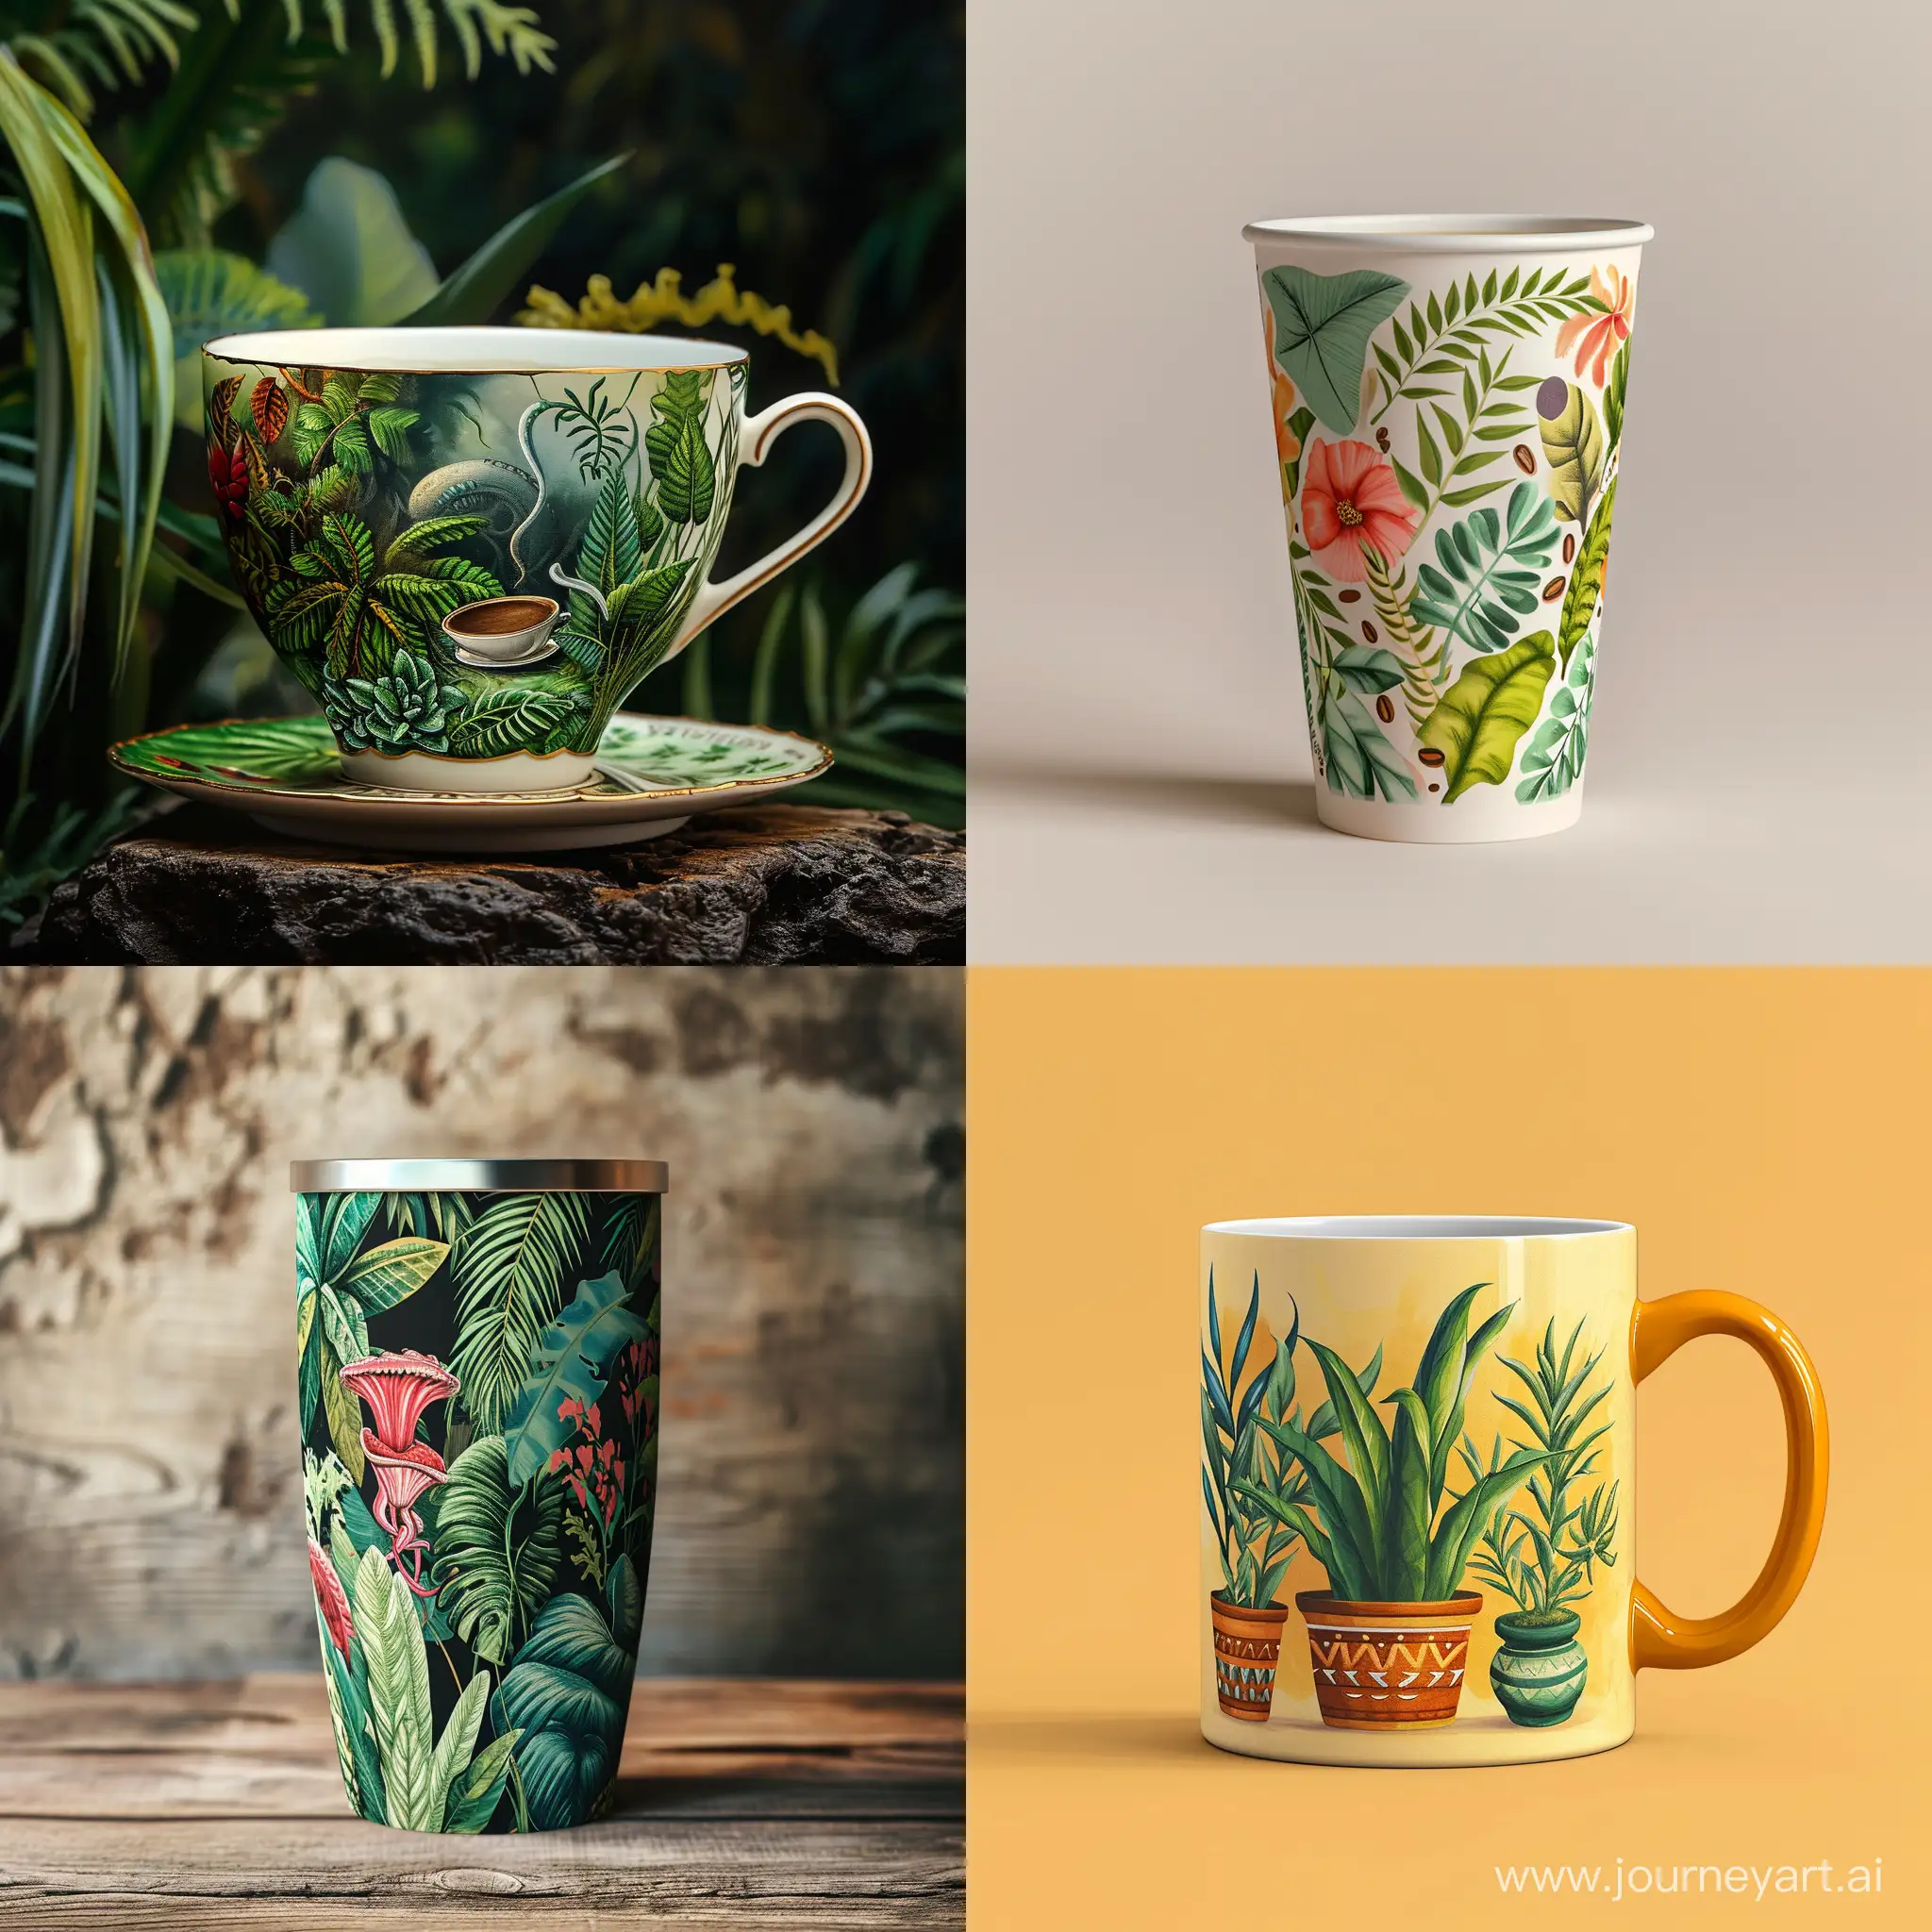 500 ml coffee cup featuring realistic art on the theme of coffee, plants, aliens, illustration style